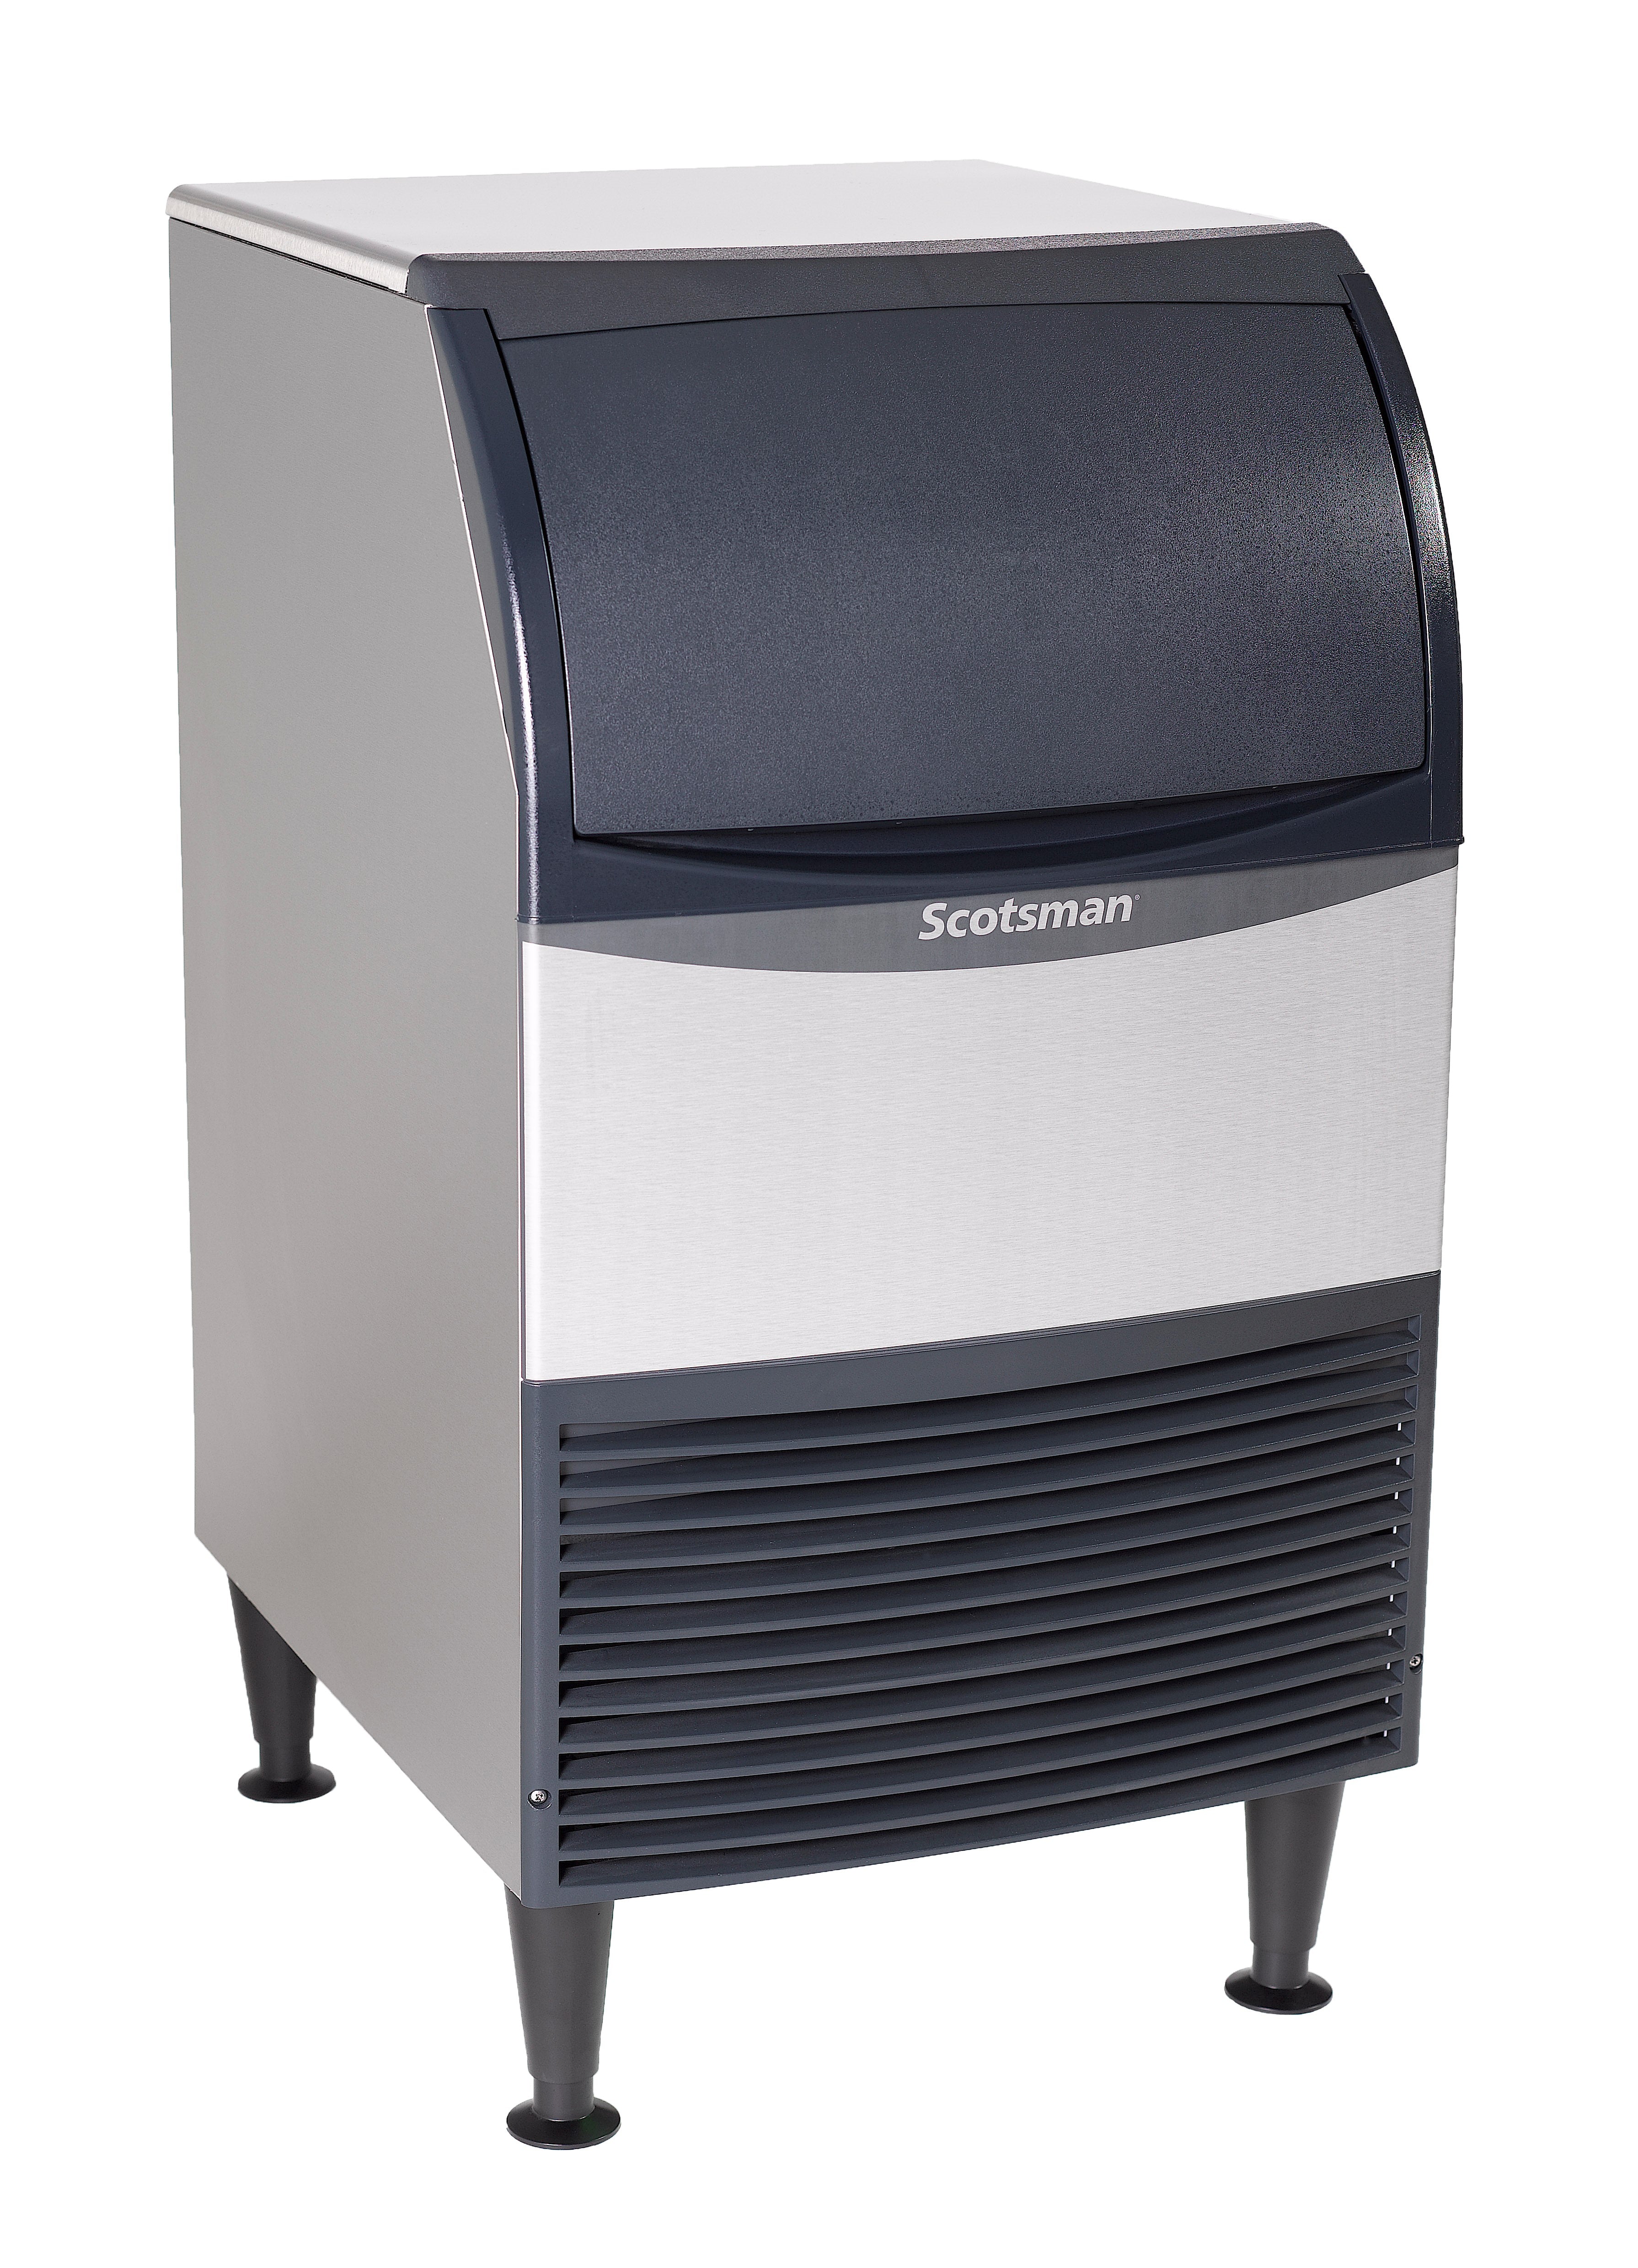 Scotsman UN1520A-1 Air Cooled Nugget Ice Maker with Bin Produces up to 167 Pounds of Ice Per Hour